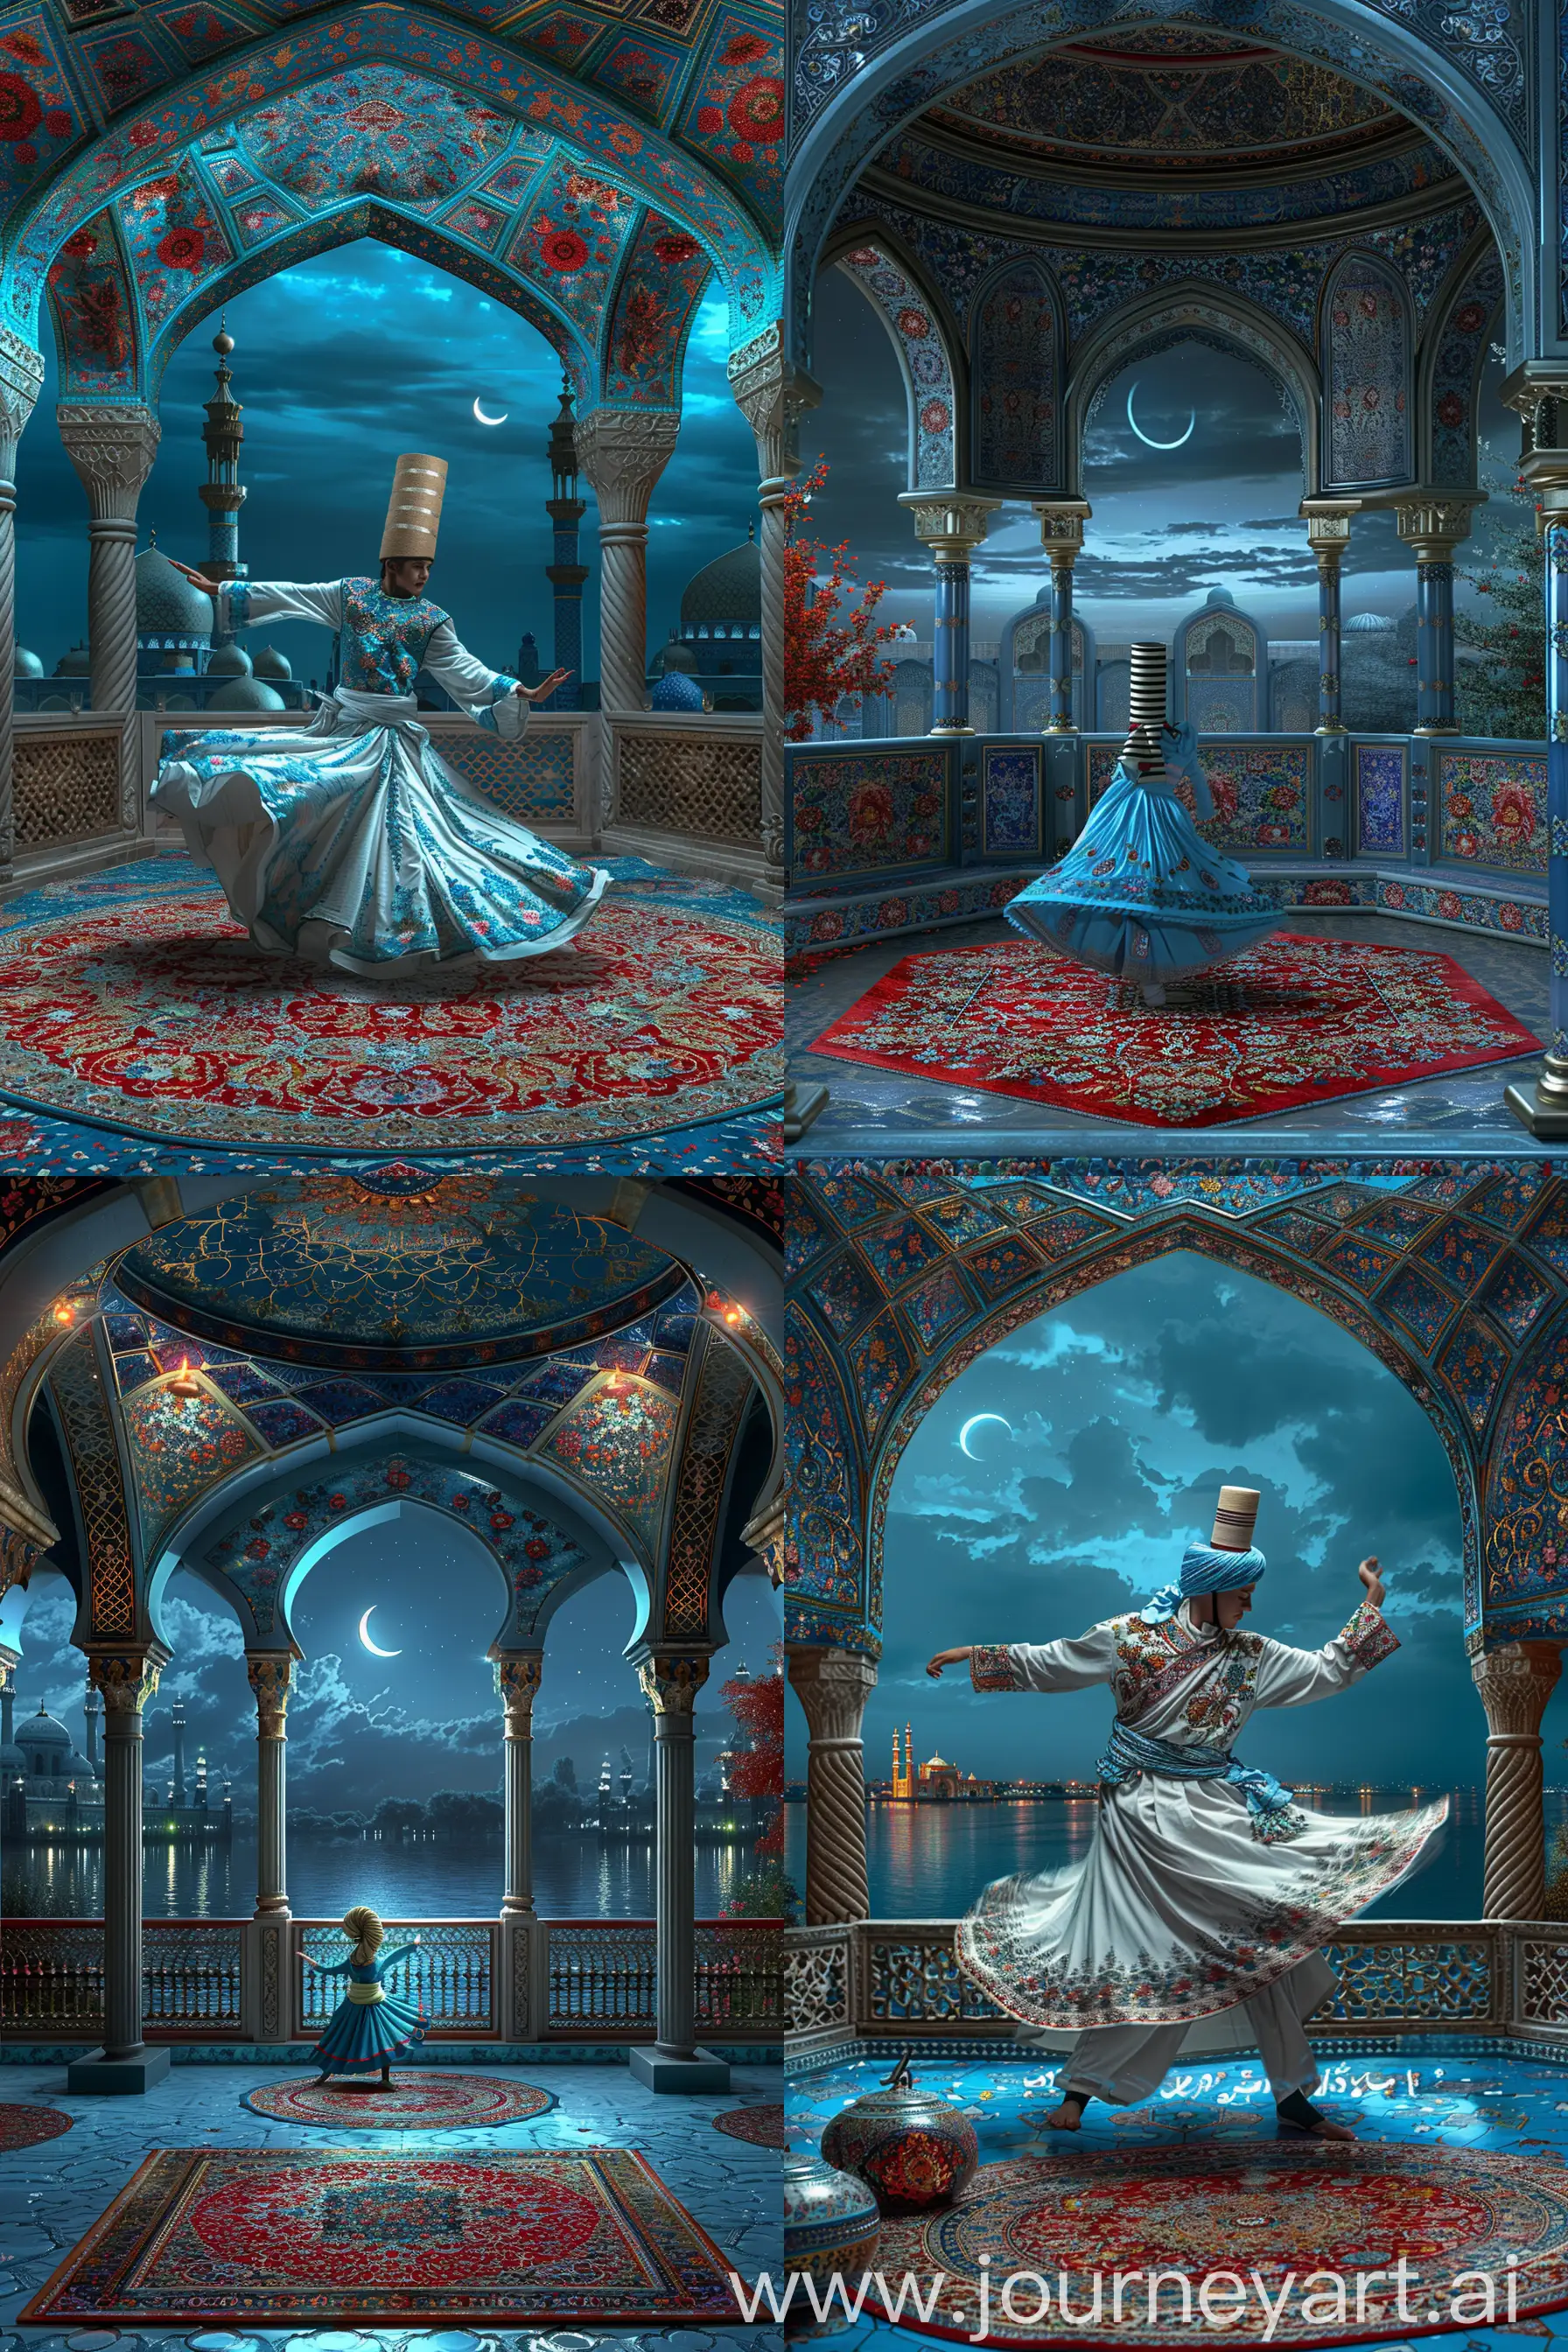 A youth British dervish wearing cylindrical fez cap performing sufi whirling sema dance on a persian carpet, inside an octagonal balcony having three arches decorated with red blue gold persian floral motifs, serene night sky with a crescent, view of Persian tiled mosque having red blue floral decorations, blue red golden composition --v 6 --ar 2:3 --sref https://cdn.discordapp.com/attachments/1213041174428782623/1246562622023667812/IMG_20240326_220808.png?ex=665ed1a9&is=665d8029&hm=6f1f1e5aecf9df059ce5f3d1854b2b16f6bc230019908a9c600a623016147b28& --s 999 --style raw